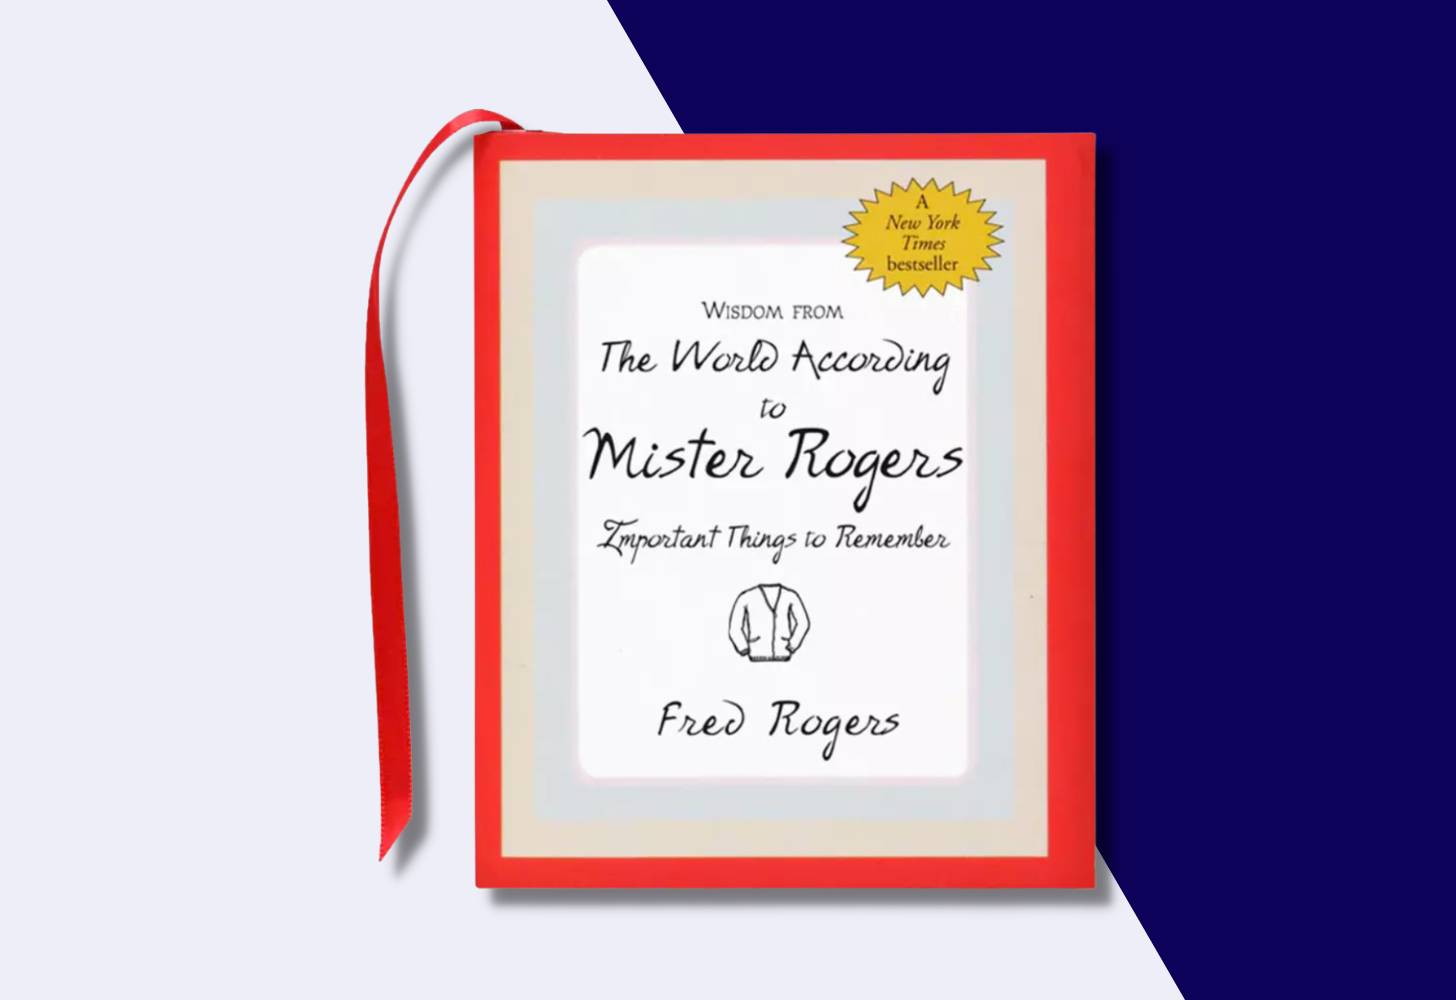 “The World According to Mister Rogers: Important Things to Remember” by Fred Rogers 